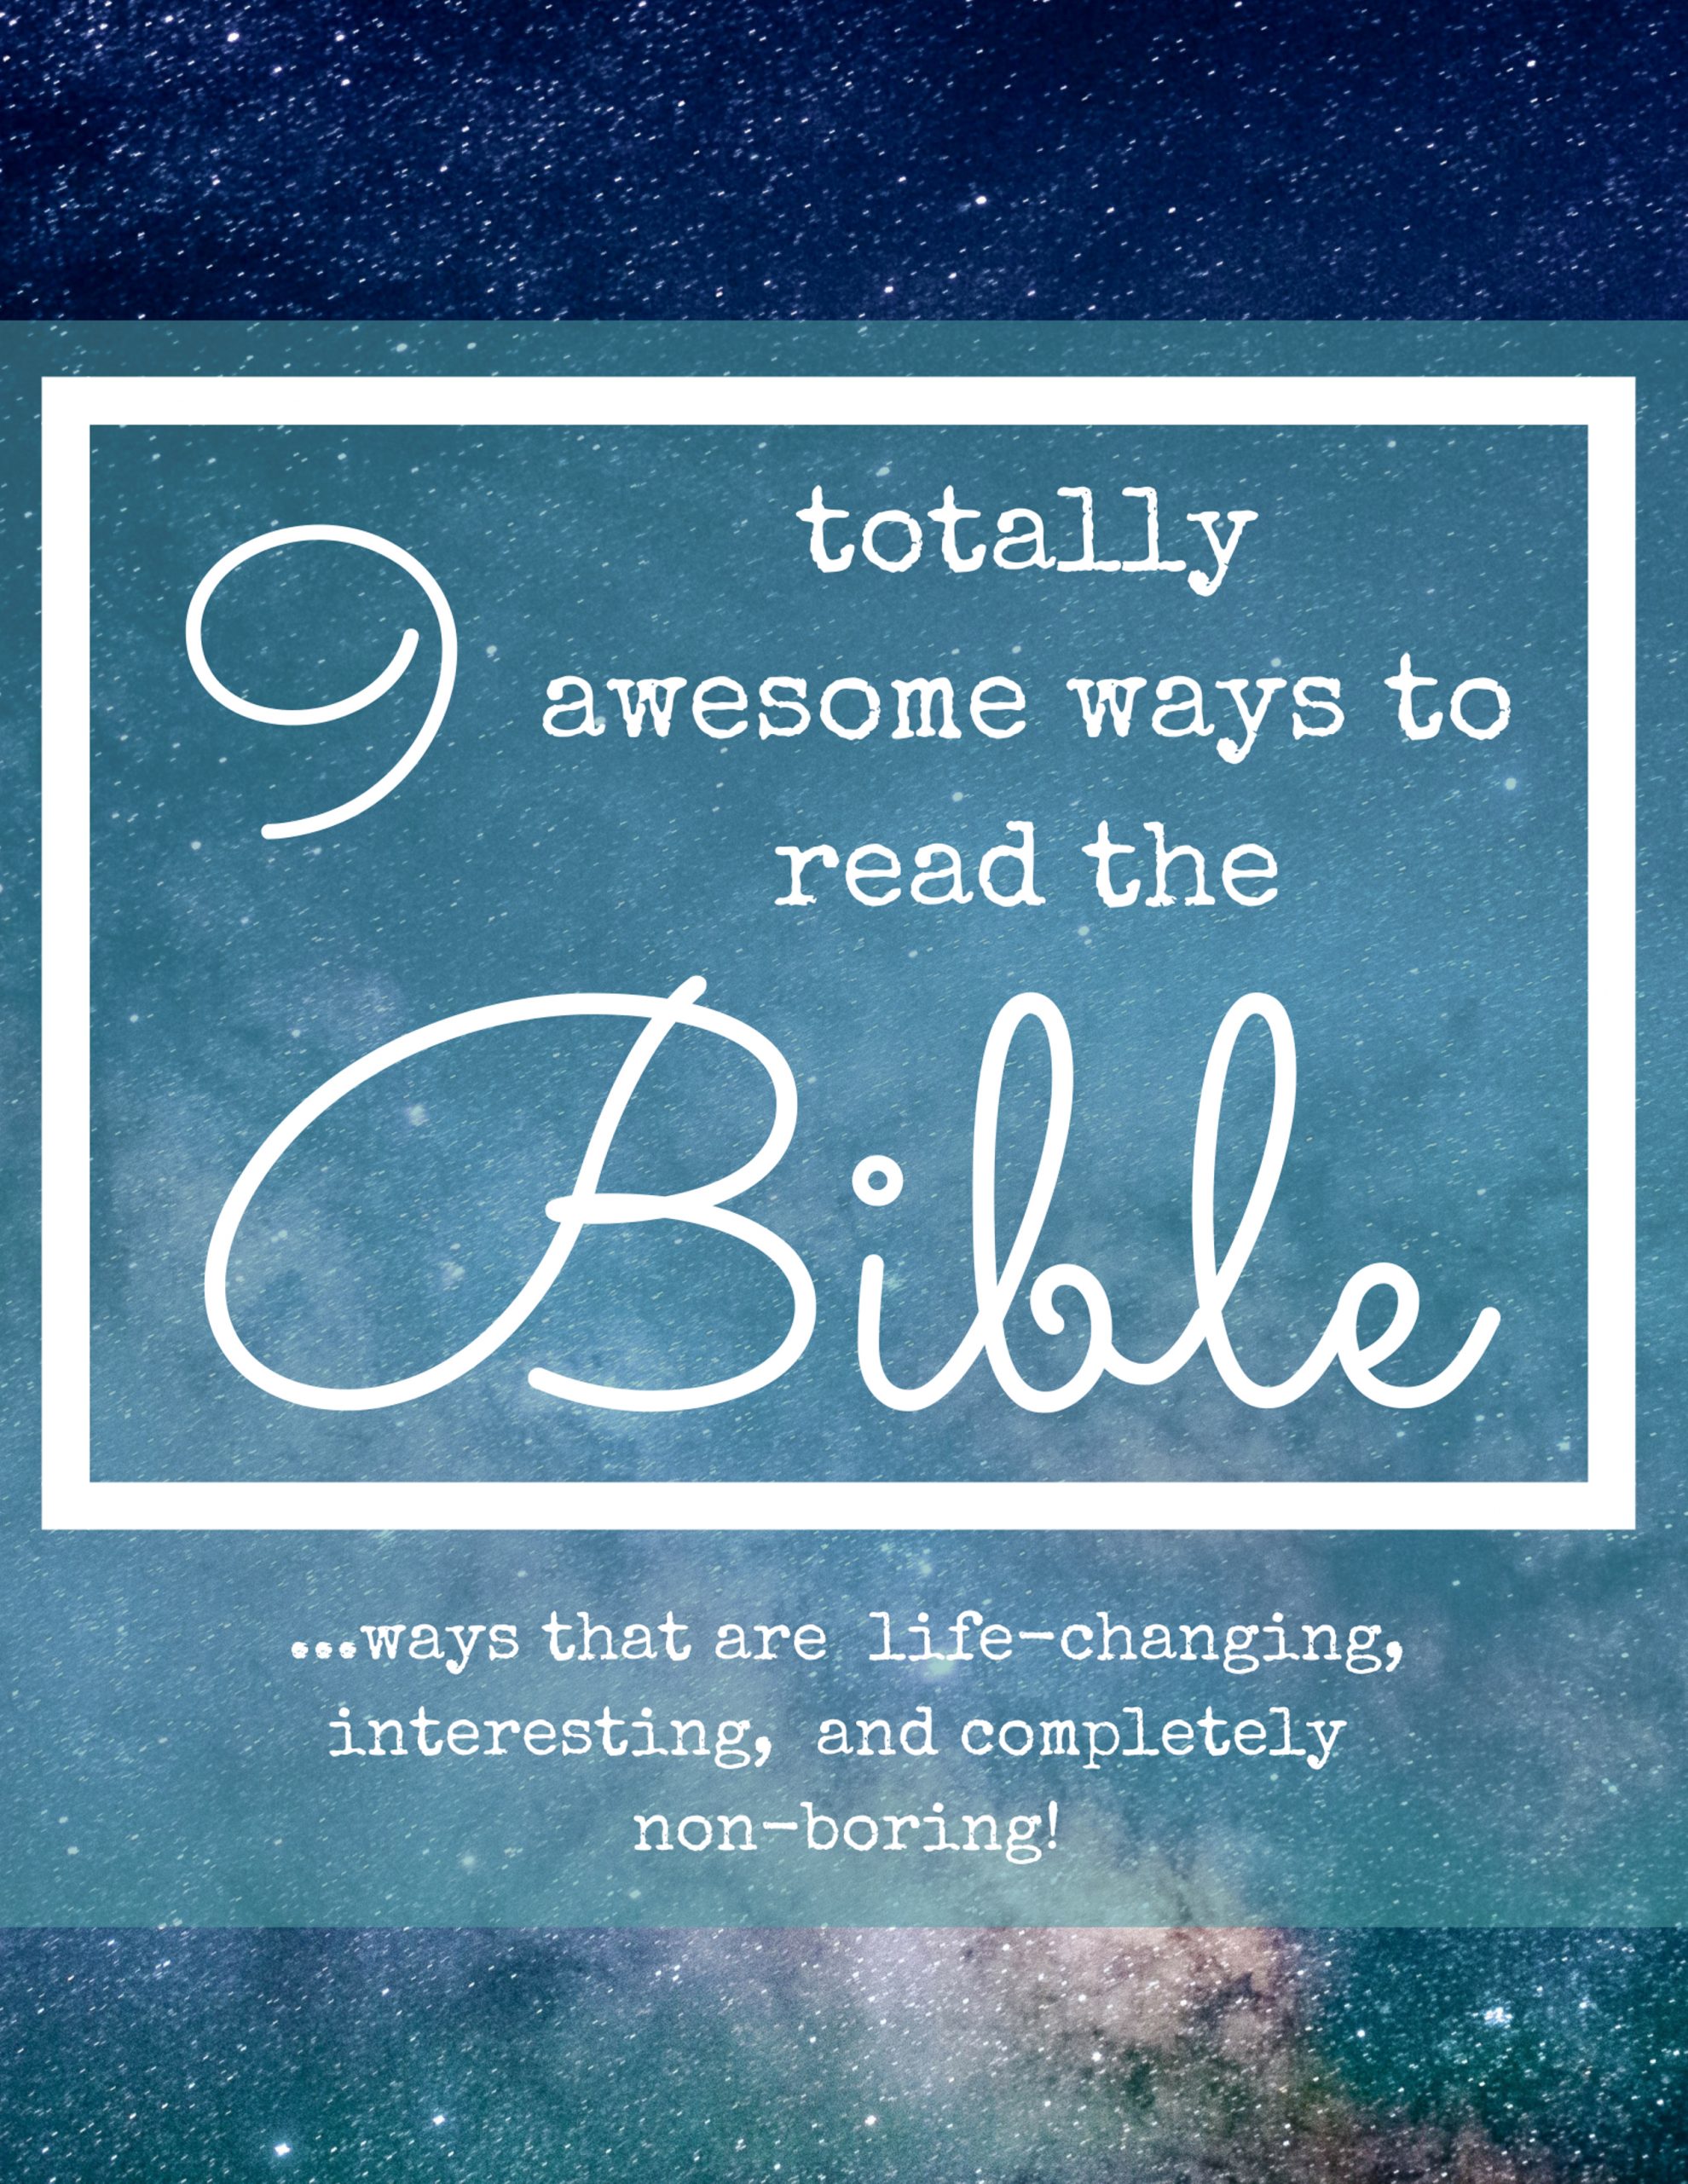 9 totally awesome ways to read the Bible #Biblestudy #Christianmom #parentinghelp